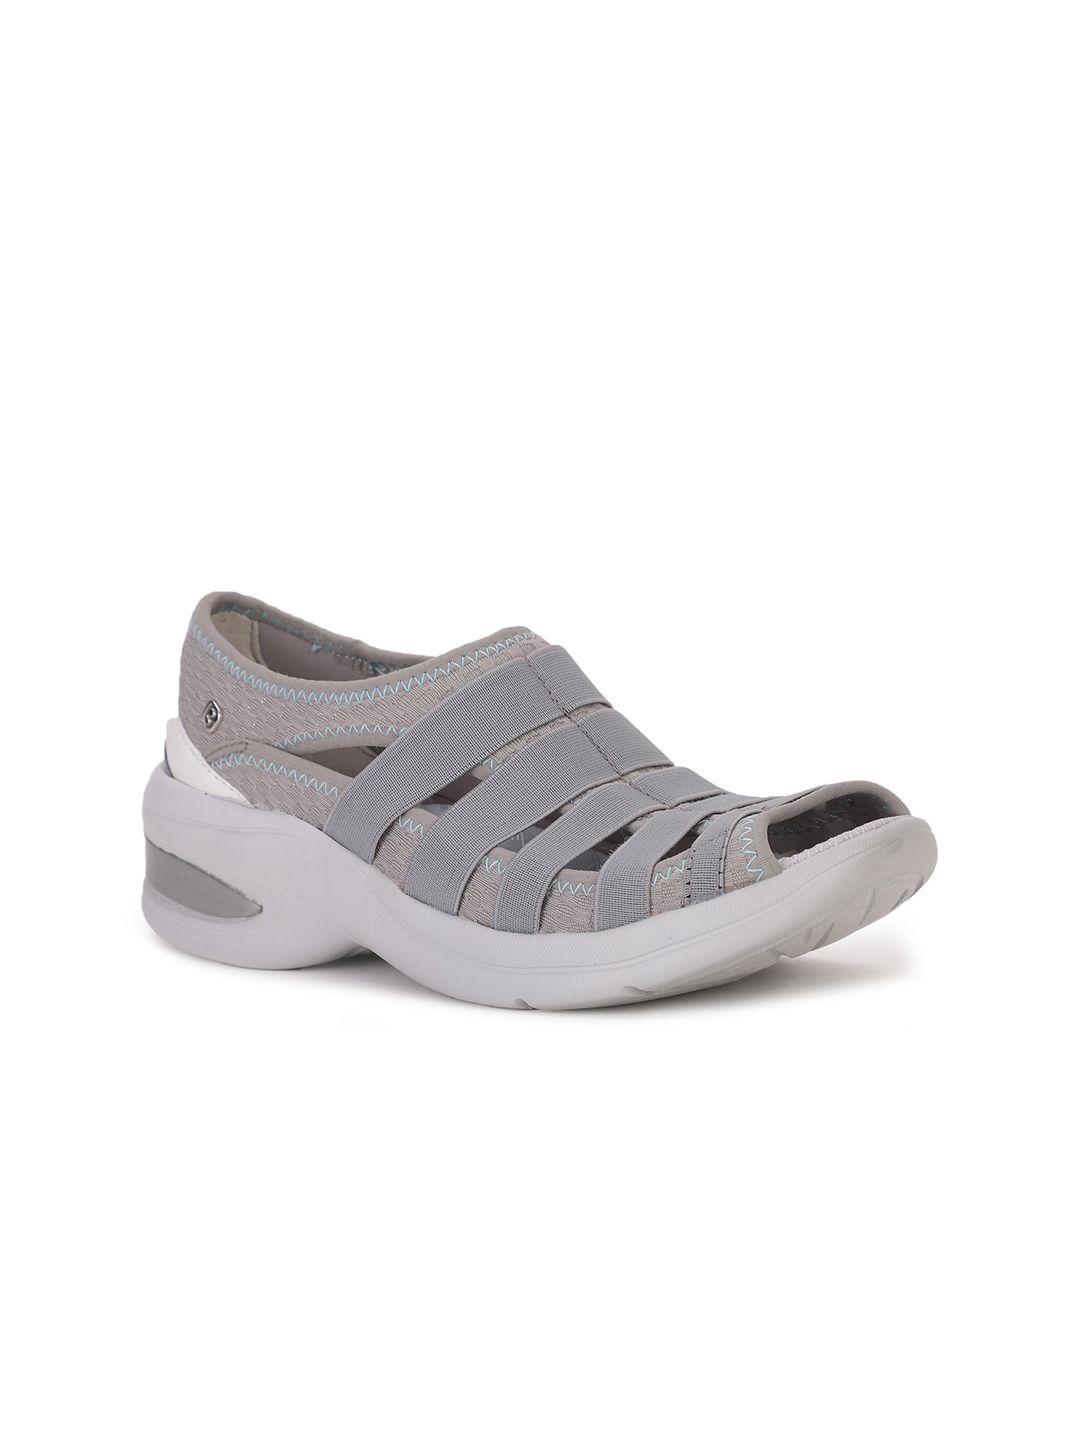 Naturalizer Women Grey Patent Leather Slip-On Sneakers Price in India